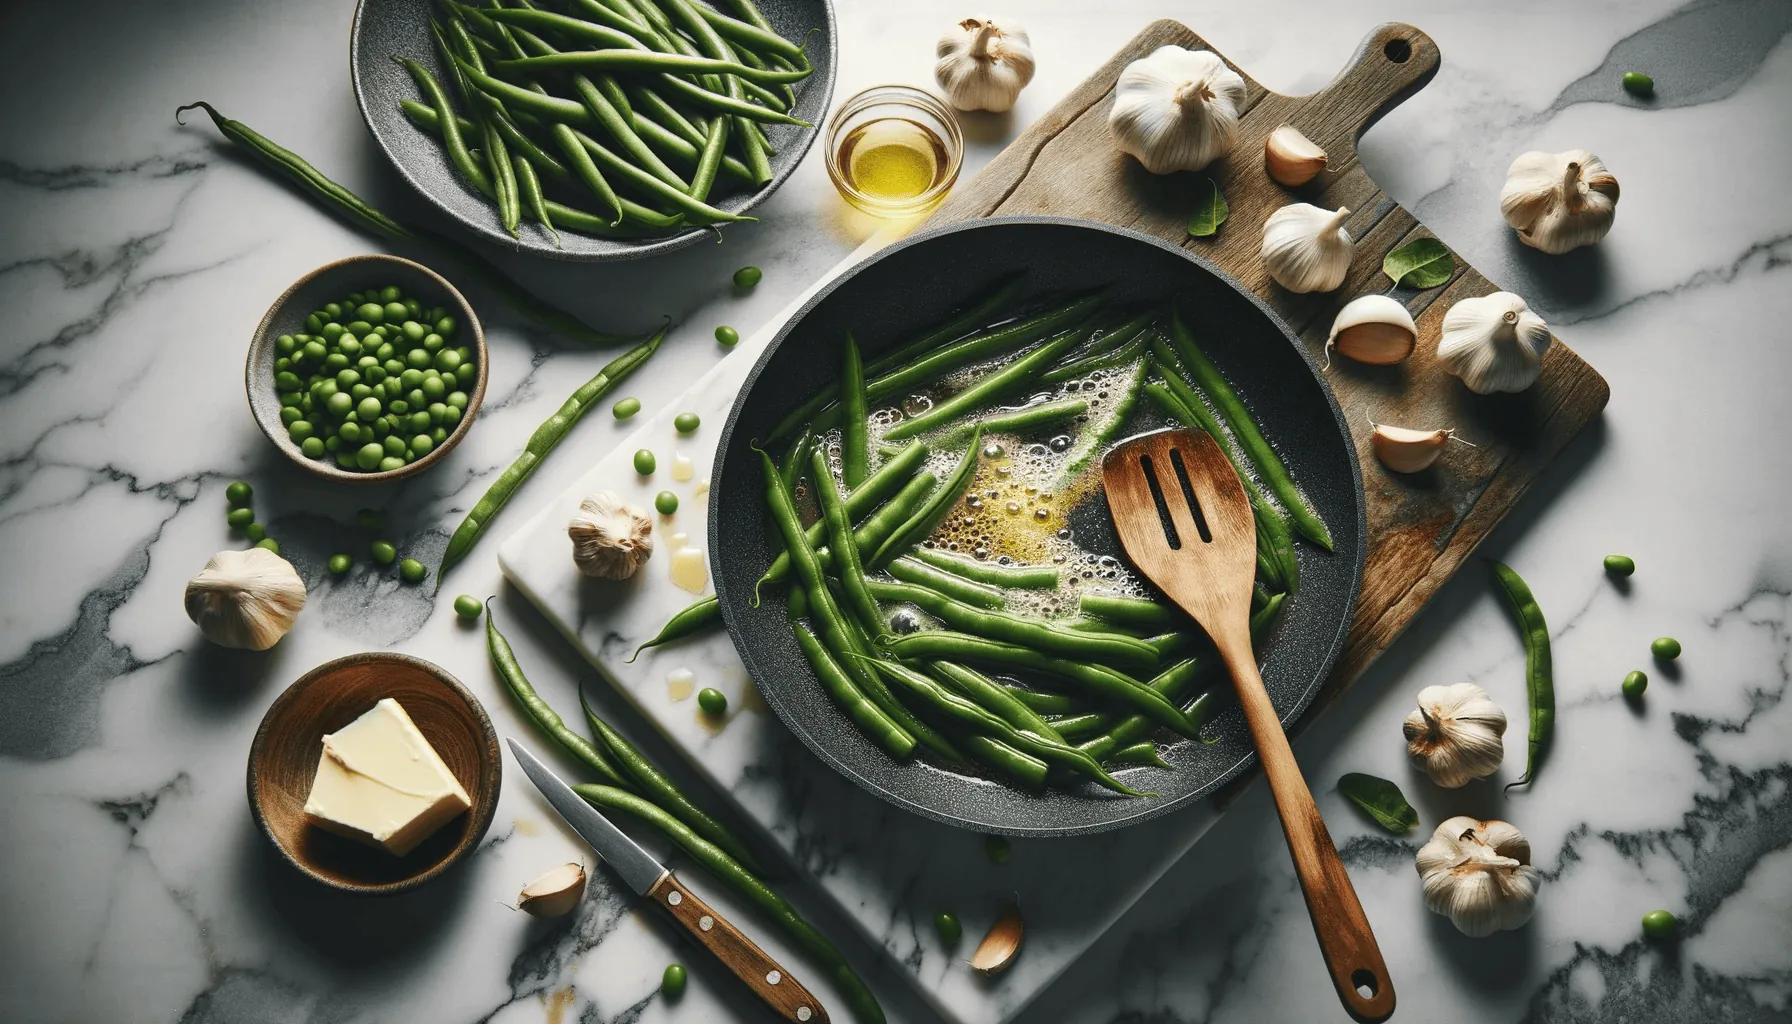 The making of maple-glazed green beans recipe